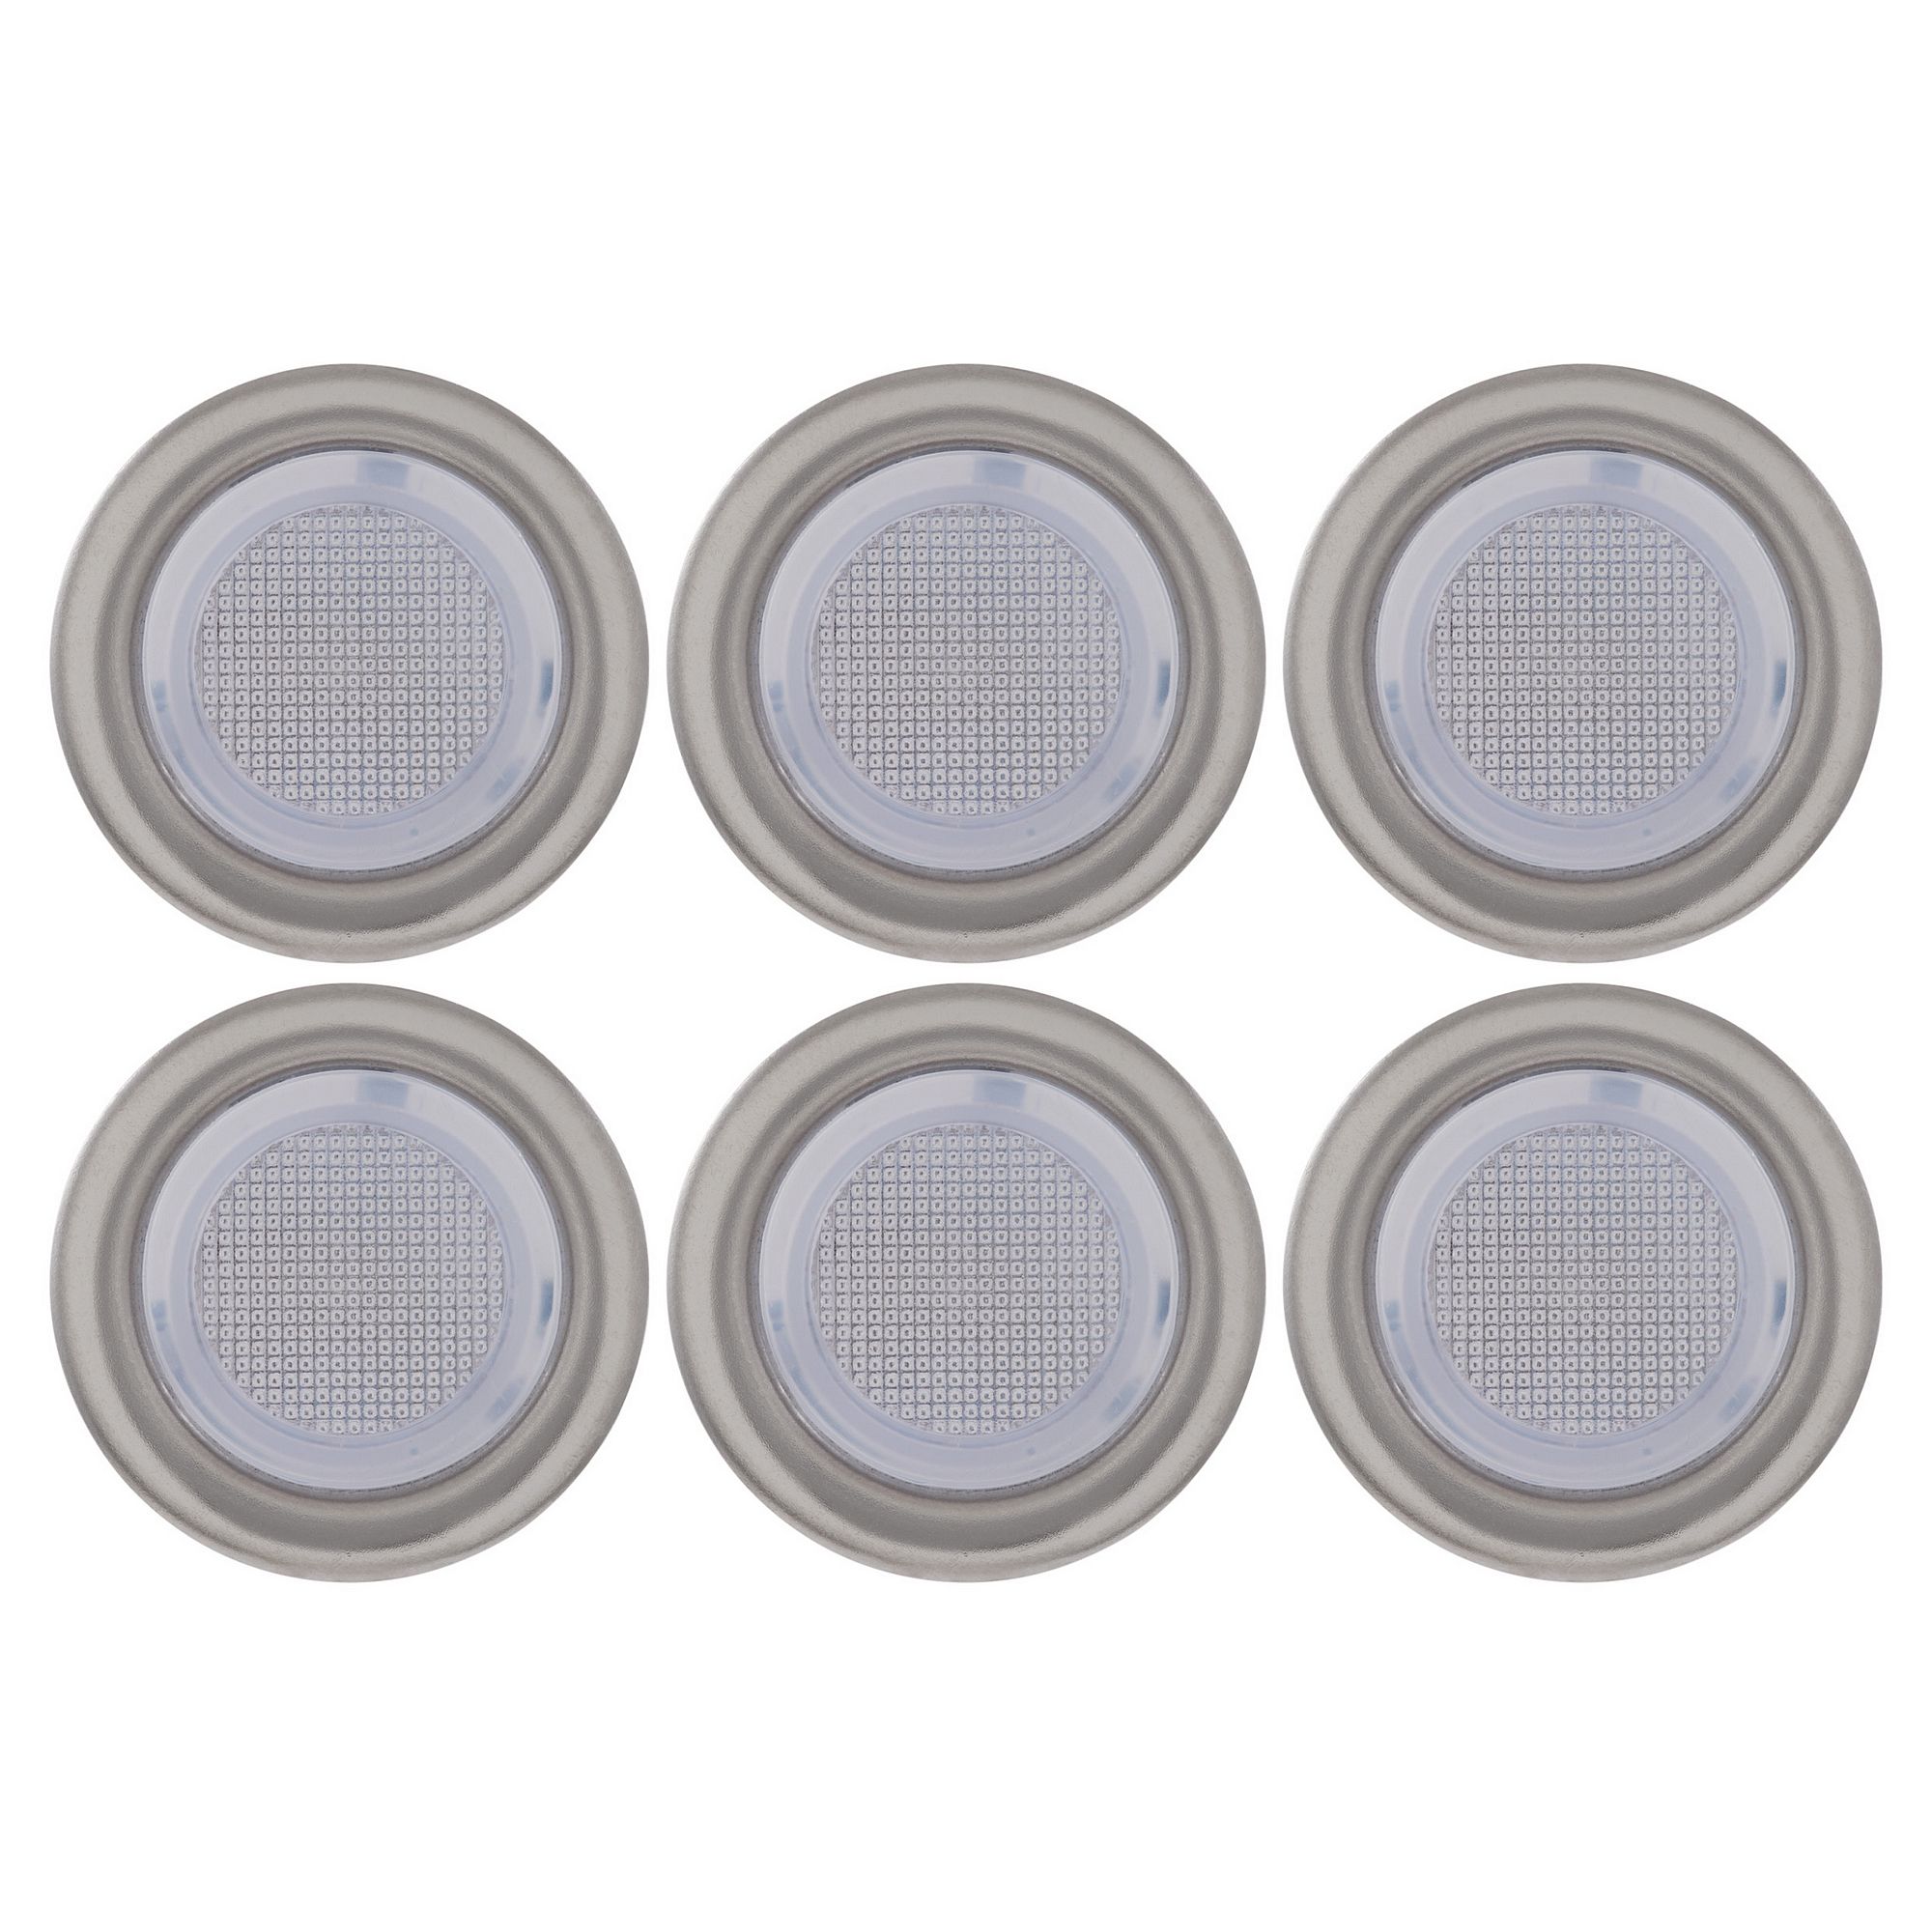 Blooma Hattan Grey Silver effect Solar-powered Blue LED Decking light, Pack of 6